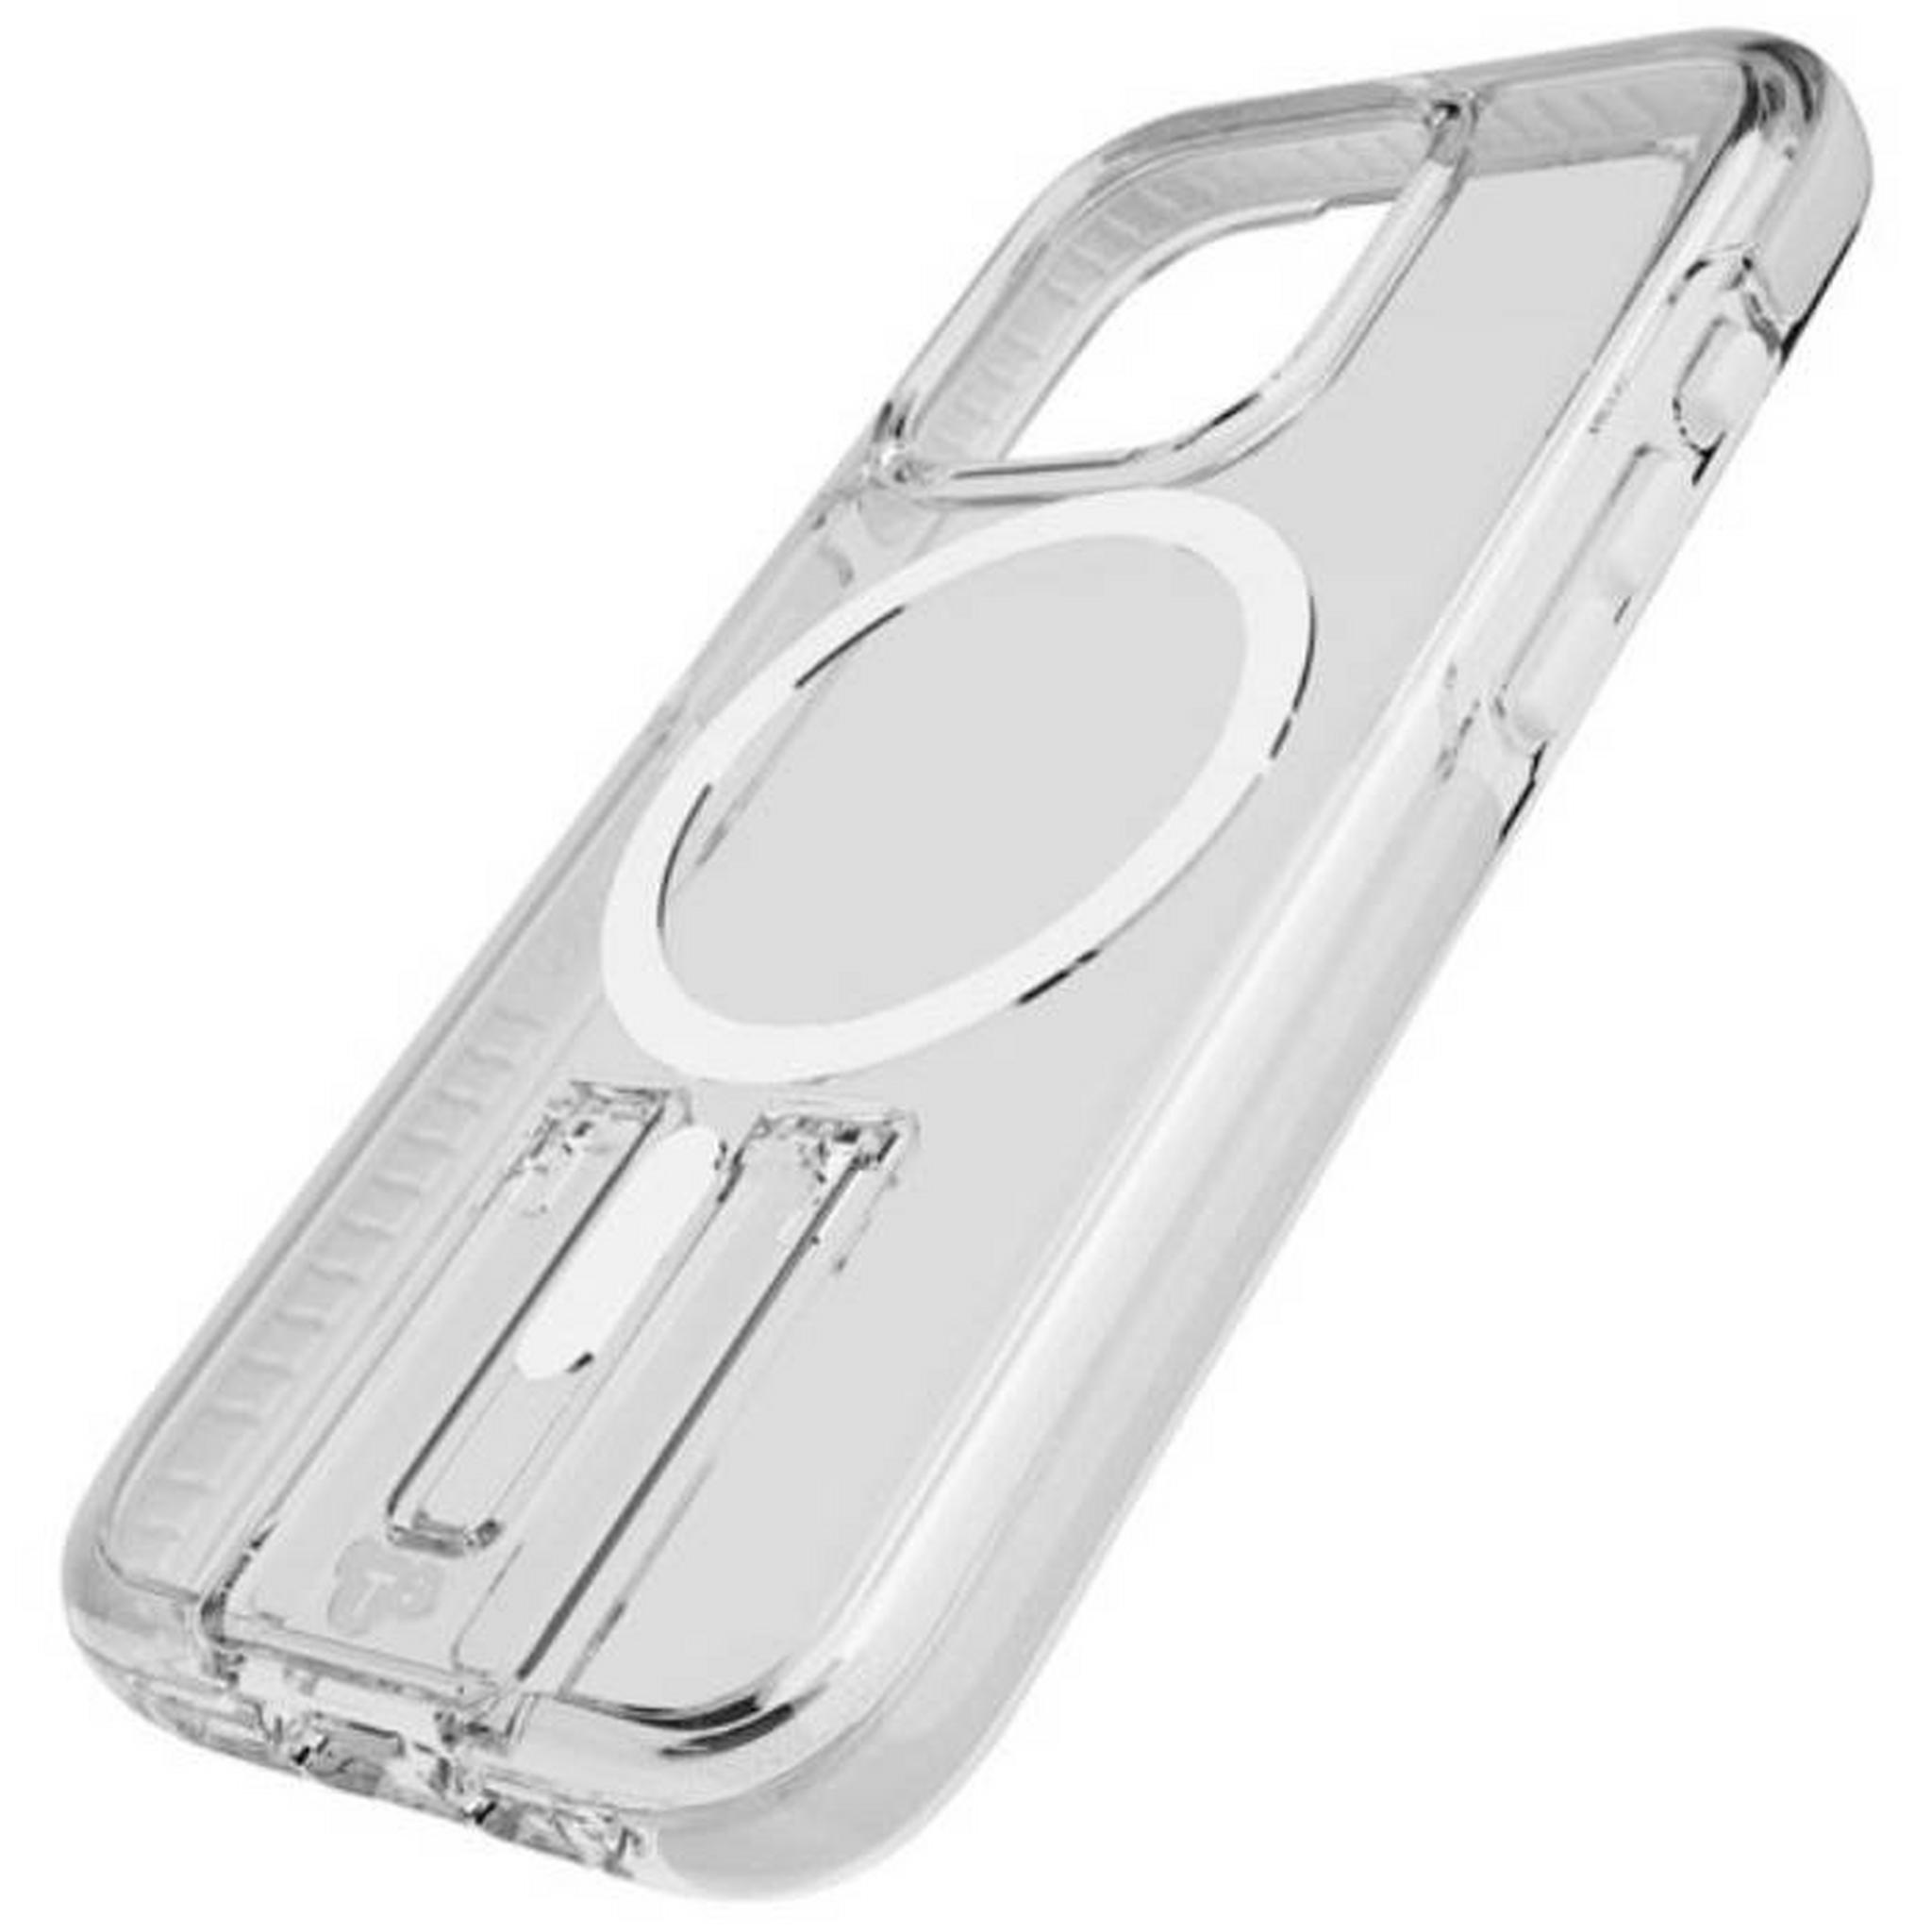 TECH21 Evo Crystal Magsafe Case for iPhone 15 Pro, T21-10262 – White